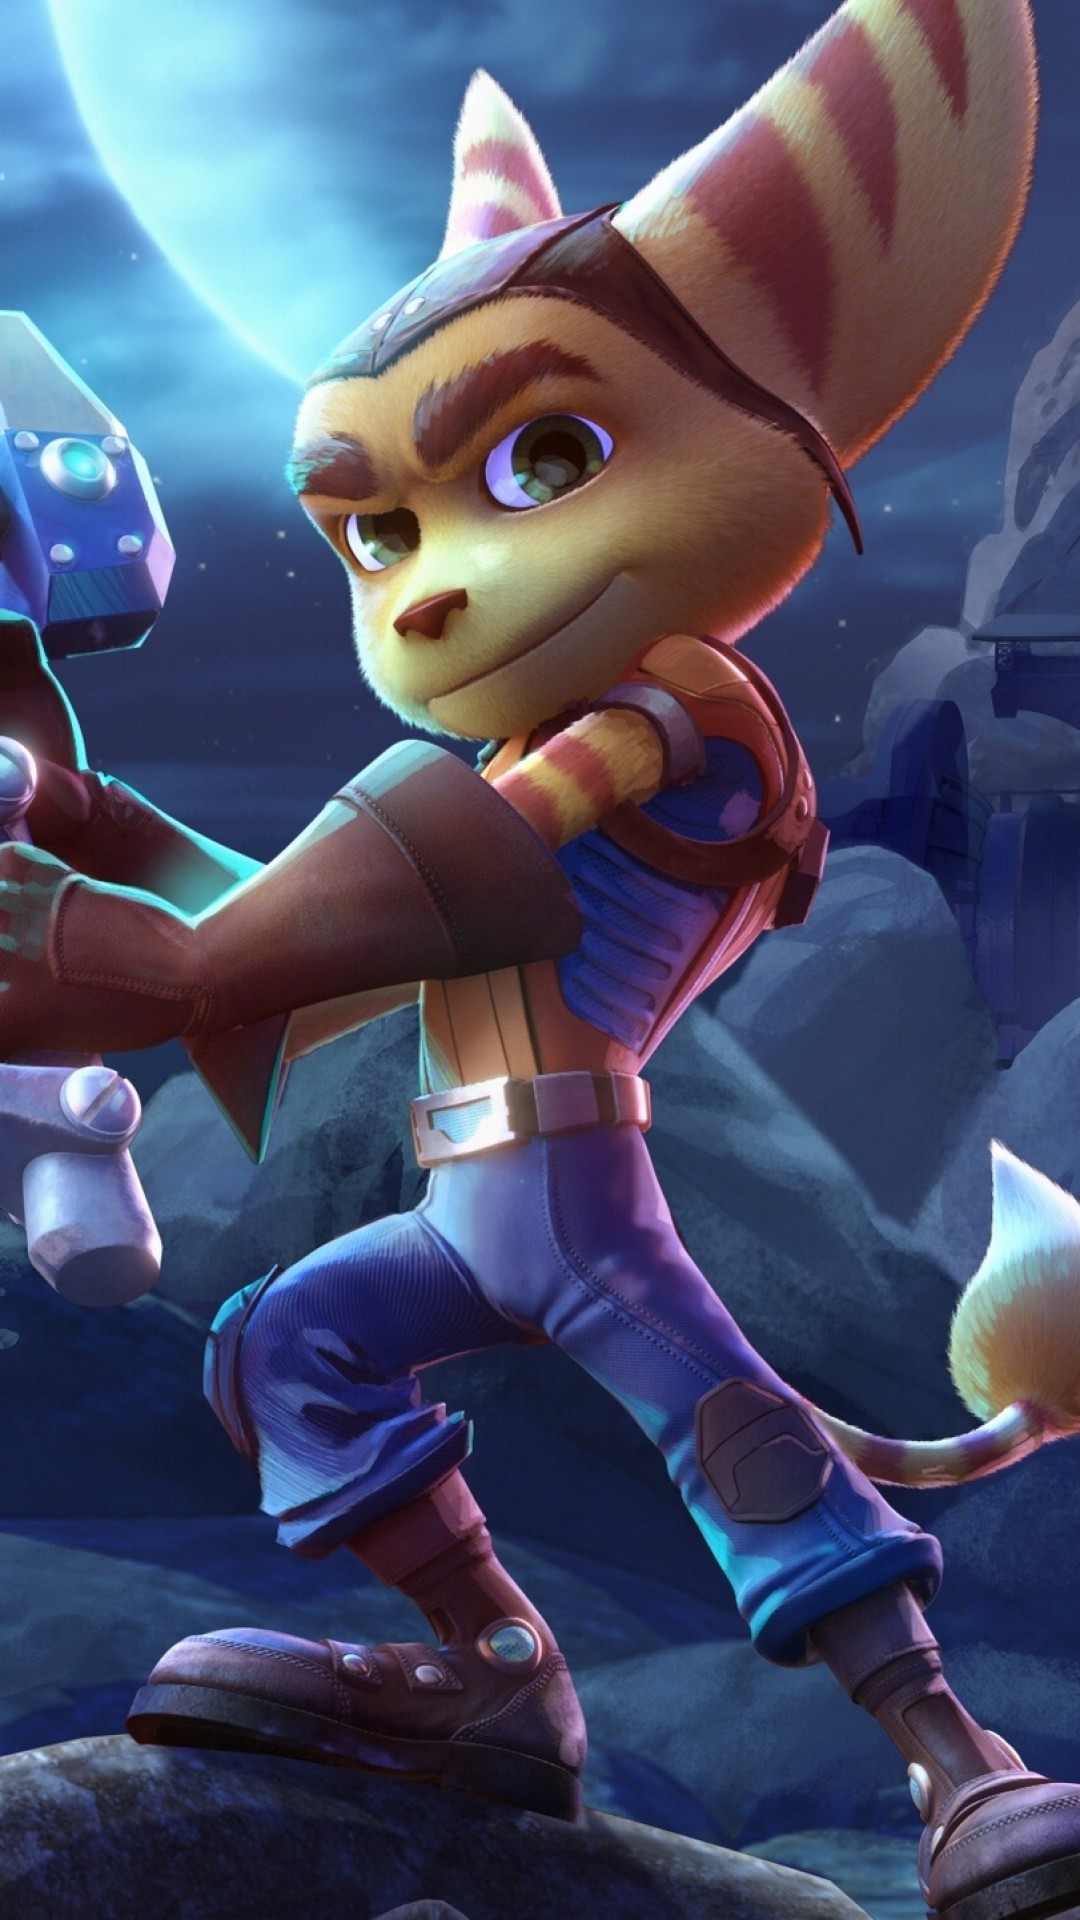 1080x1920  Wallpaper ratchet and clank, ratchet, clank